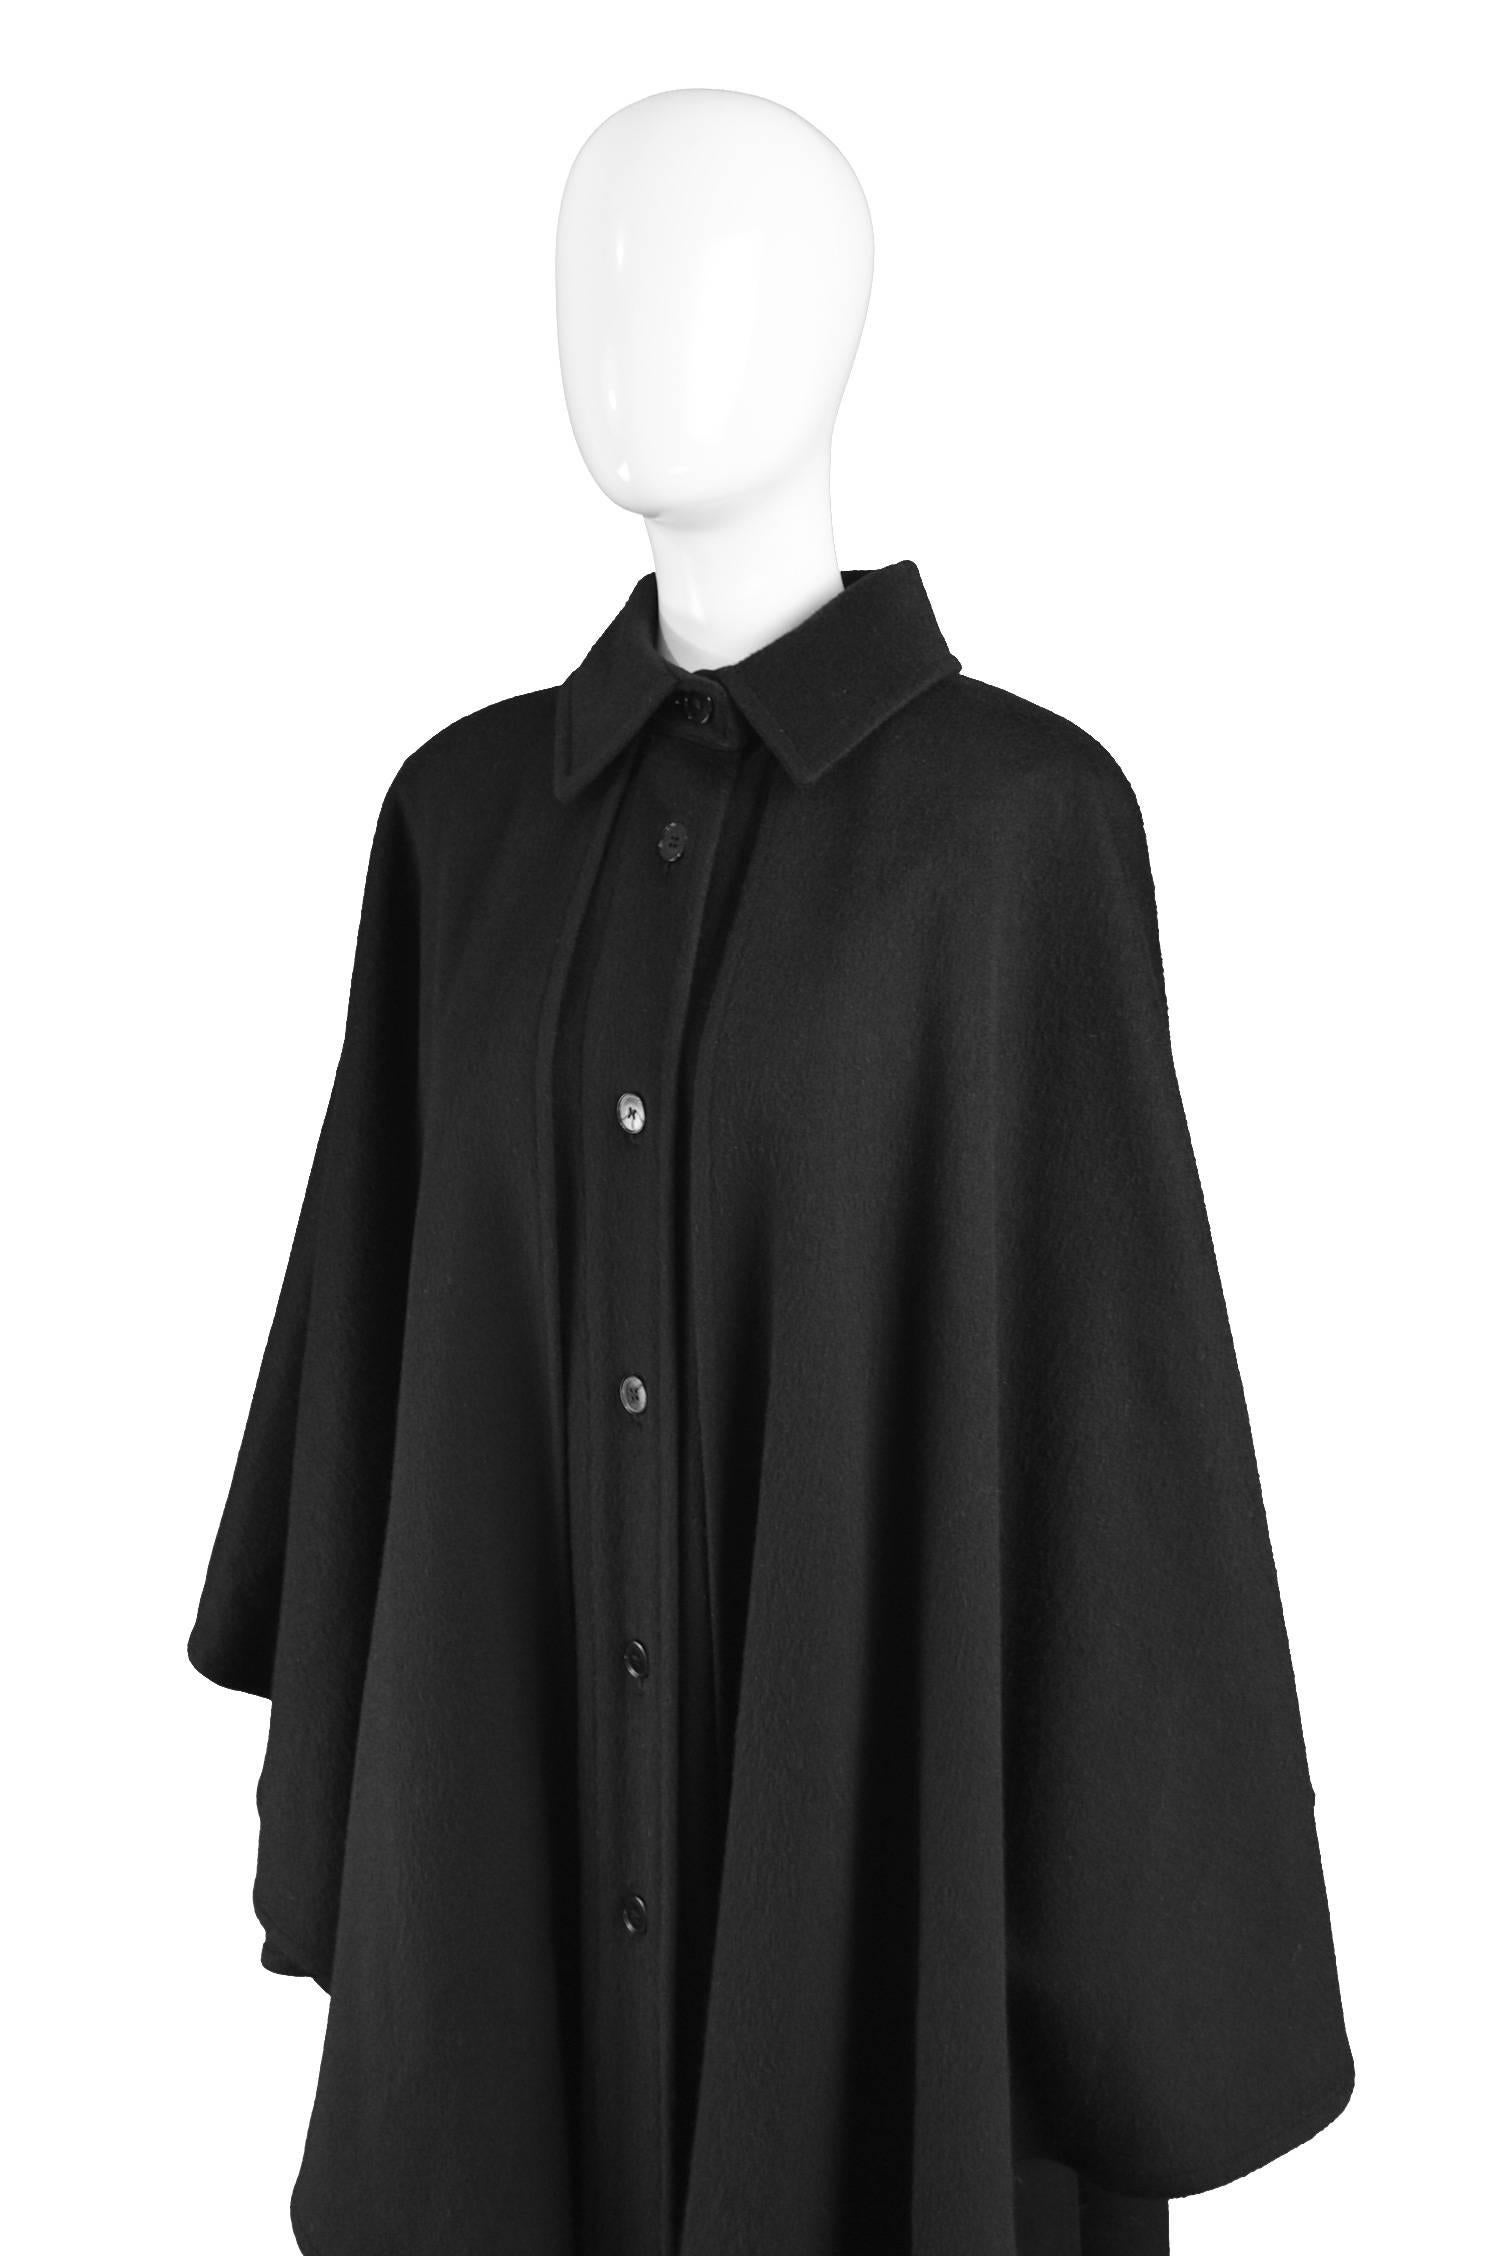 black evening GUY LAROCHE wool capecloak with ruffled collar. Vintage